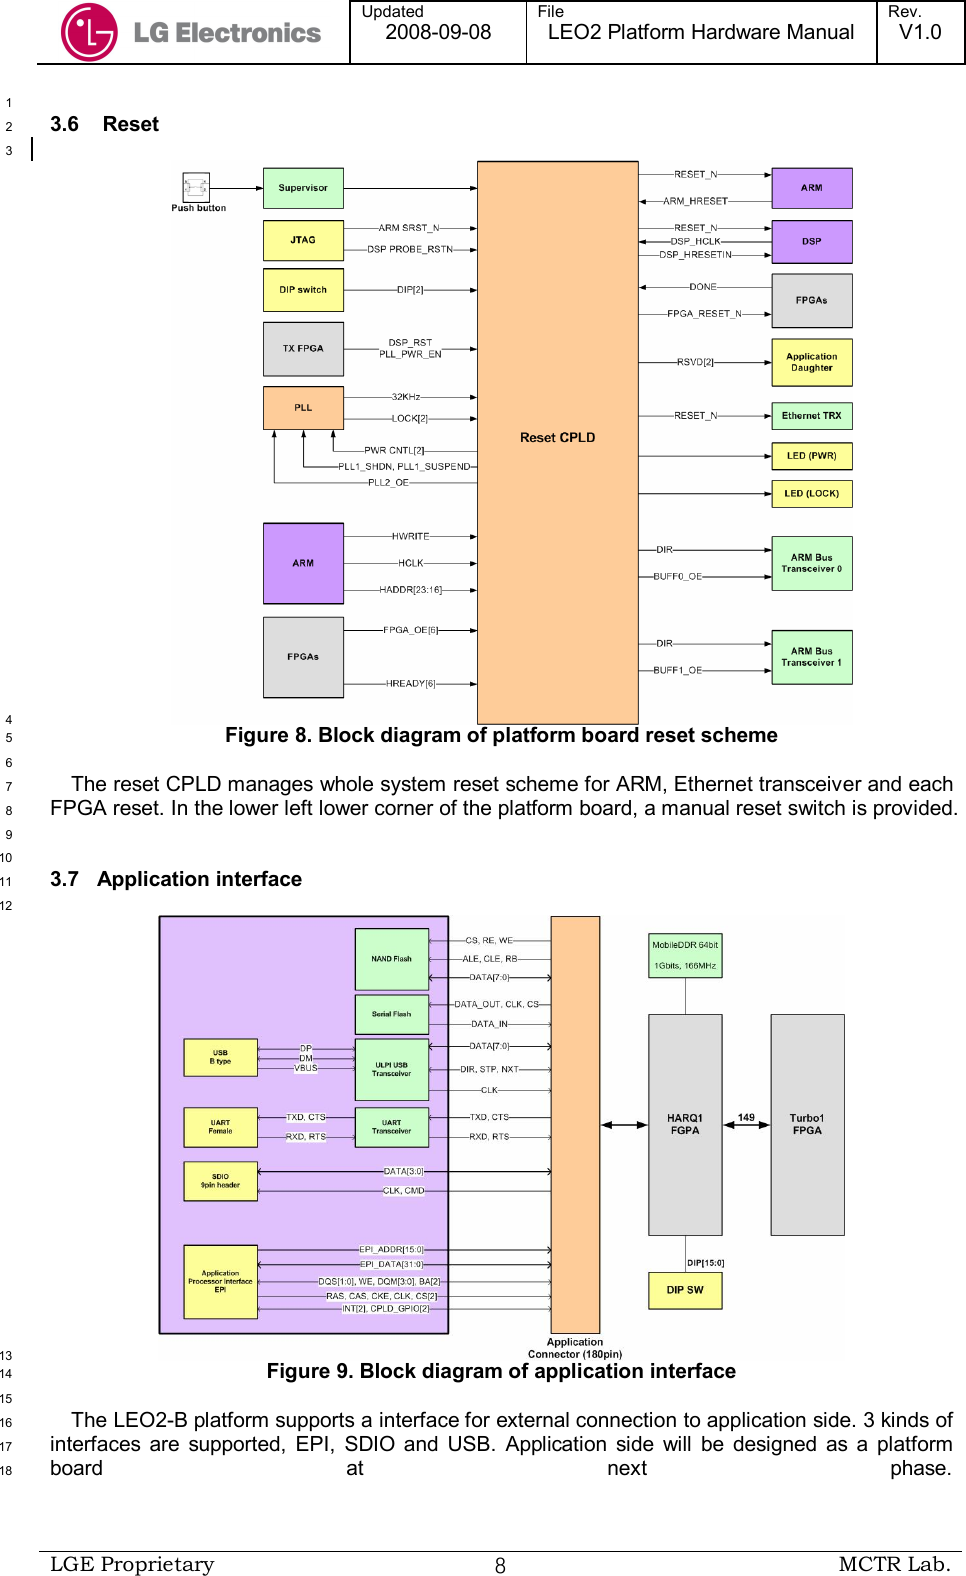  Updated 2008-09-08 File LEO2 Platform Hardware Manual Rev. V1.0   LGE Proprietary  ８ MCTR Lab.   1 3.6    Reset 2  3  4 Figure 8. Block diagram of platform board reset scheme 5  6 The reset CPLD manages whole system reset scheme for ARM, Ethernet transceiver and each 7 FPGA reset. In the lower left lower corner of the platform board, a manual reset switch is provided.  8  9  10 3.7   Application interface 11  12  13 Figure 9. Block diagram of application interface 14  15 The LEO2-B platform supports a interface for external connection to application side. 3 kinds of 16 interfaces  are  supported,  EPI,  SDIO  and  USB.  Application  side  will  be  designed  as  a  platform 17 board  at  next  phase.18 